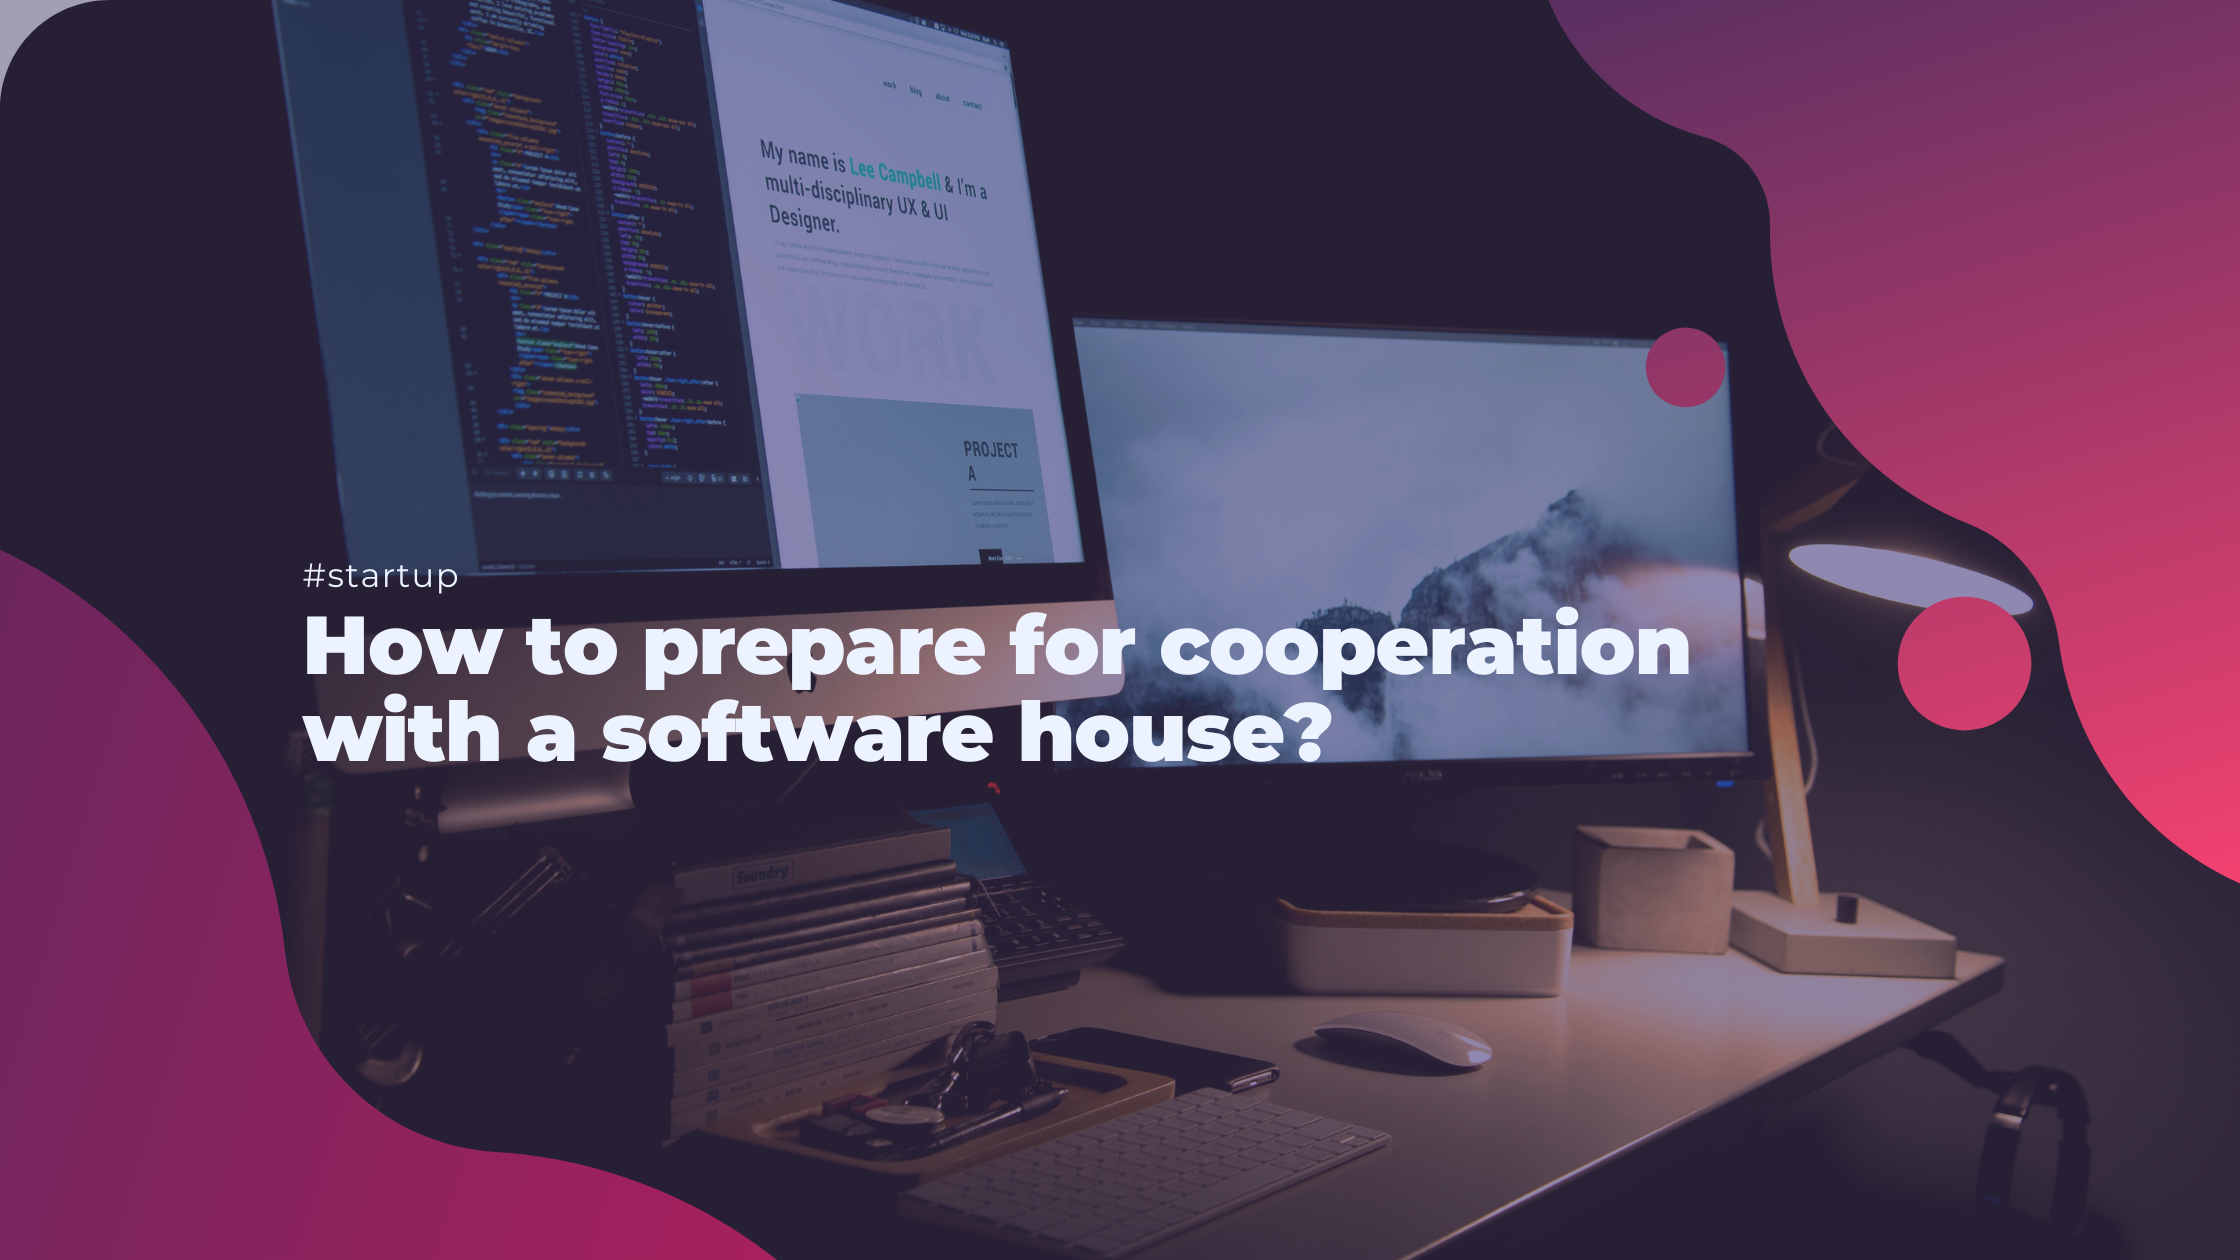 How to prepare for cooperation with a software house?